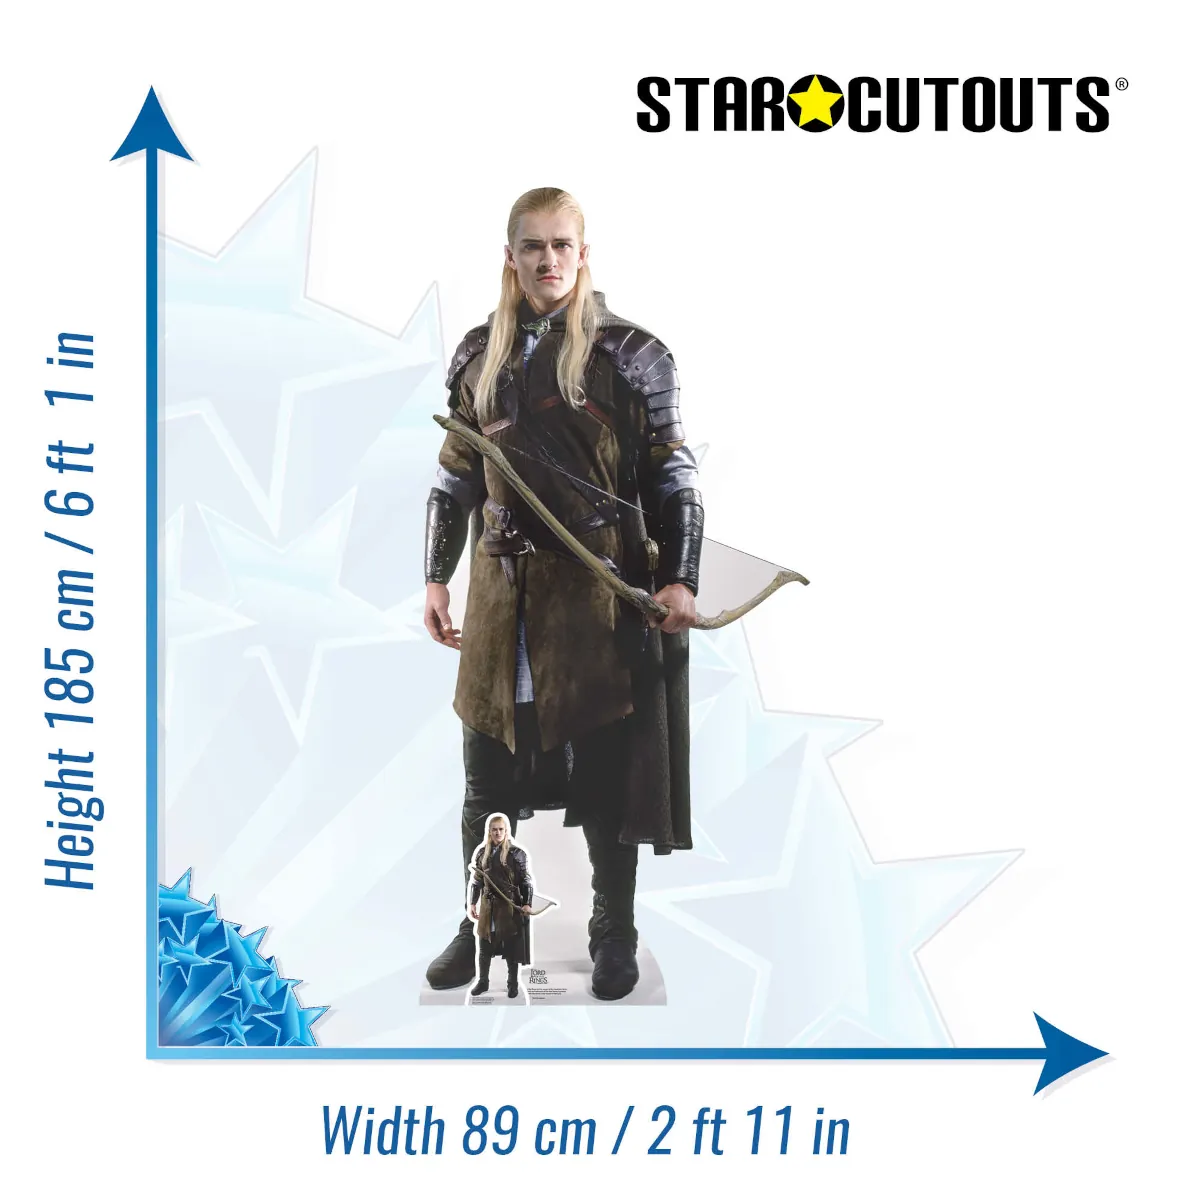 SC4129 Legolas (The Lord of the Rings) Official Lifesize + Mini Cardboard Cutout Standee Size